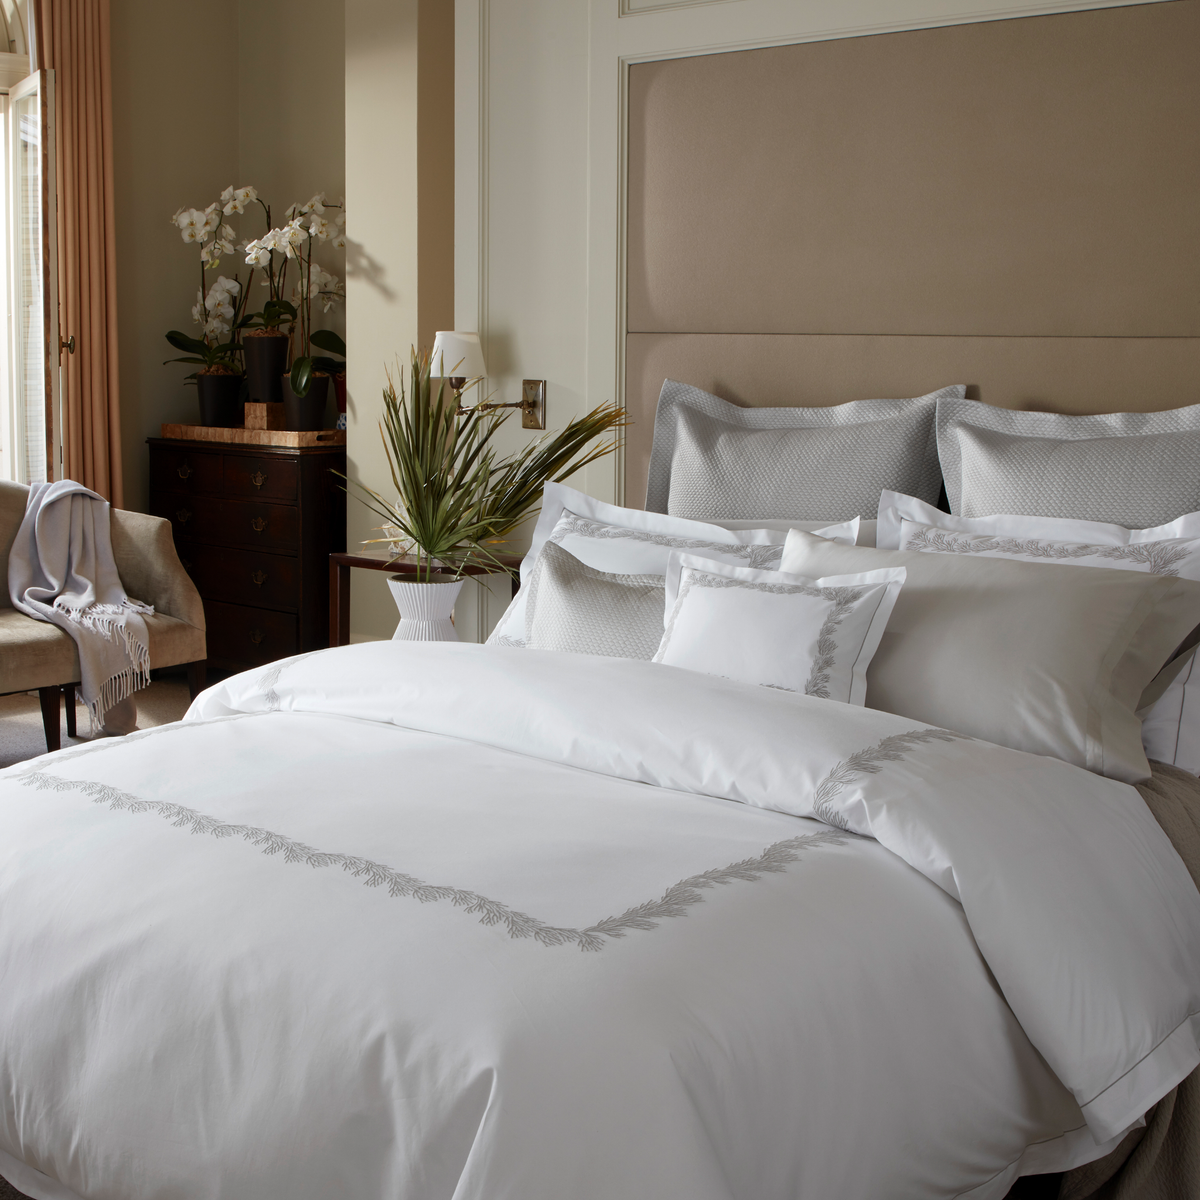 Full Lifestyle Image of Matouk Atoll Bedding Collection Alabaster Color